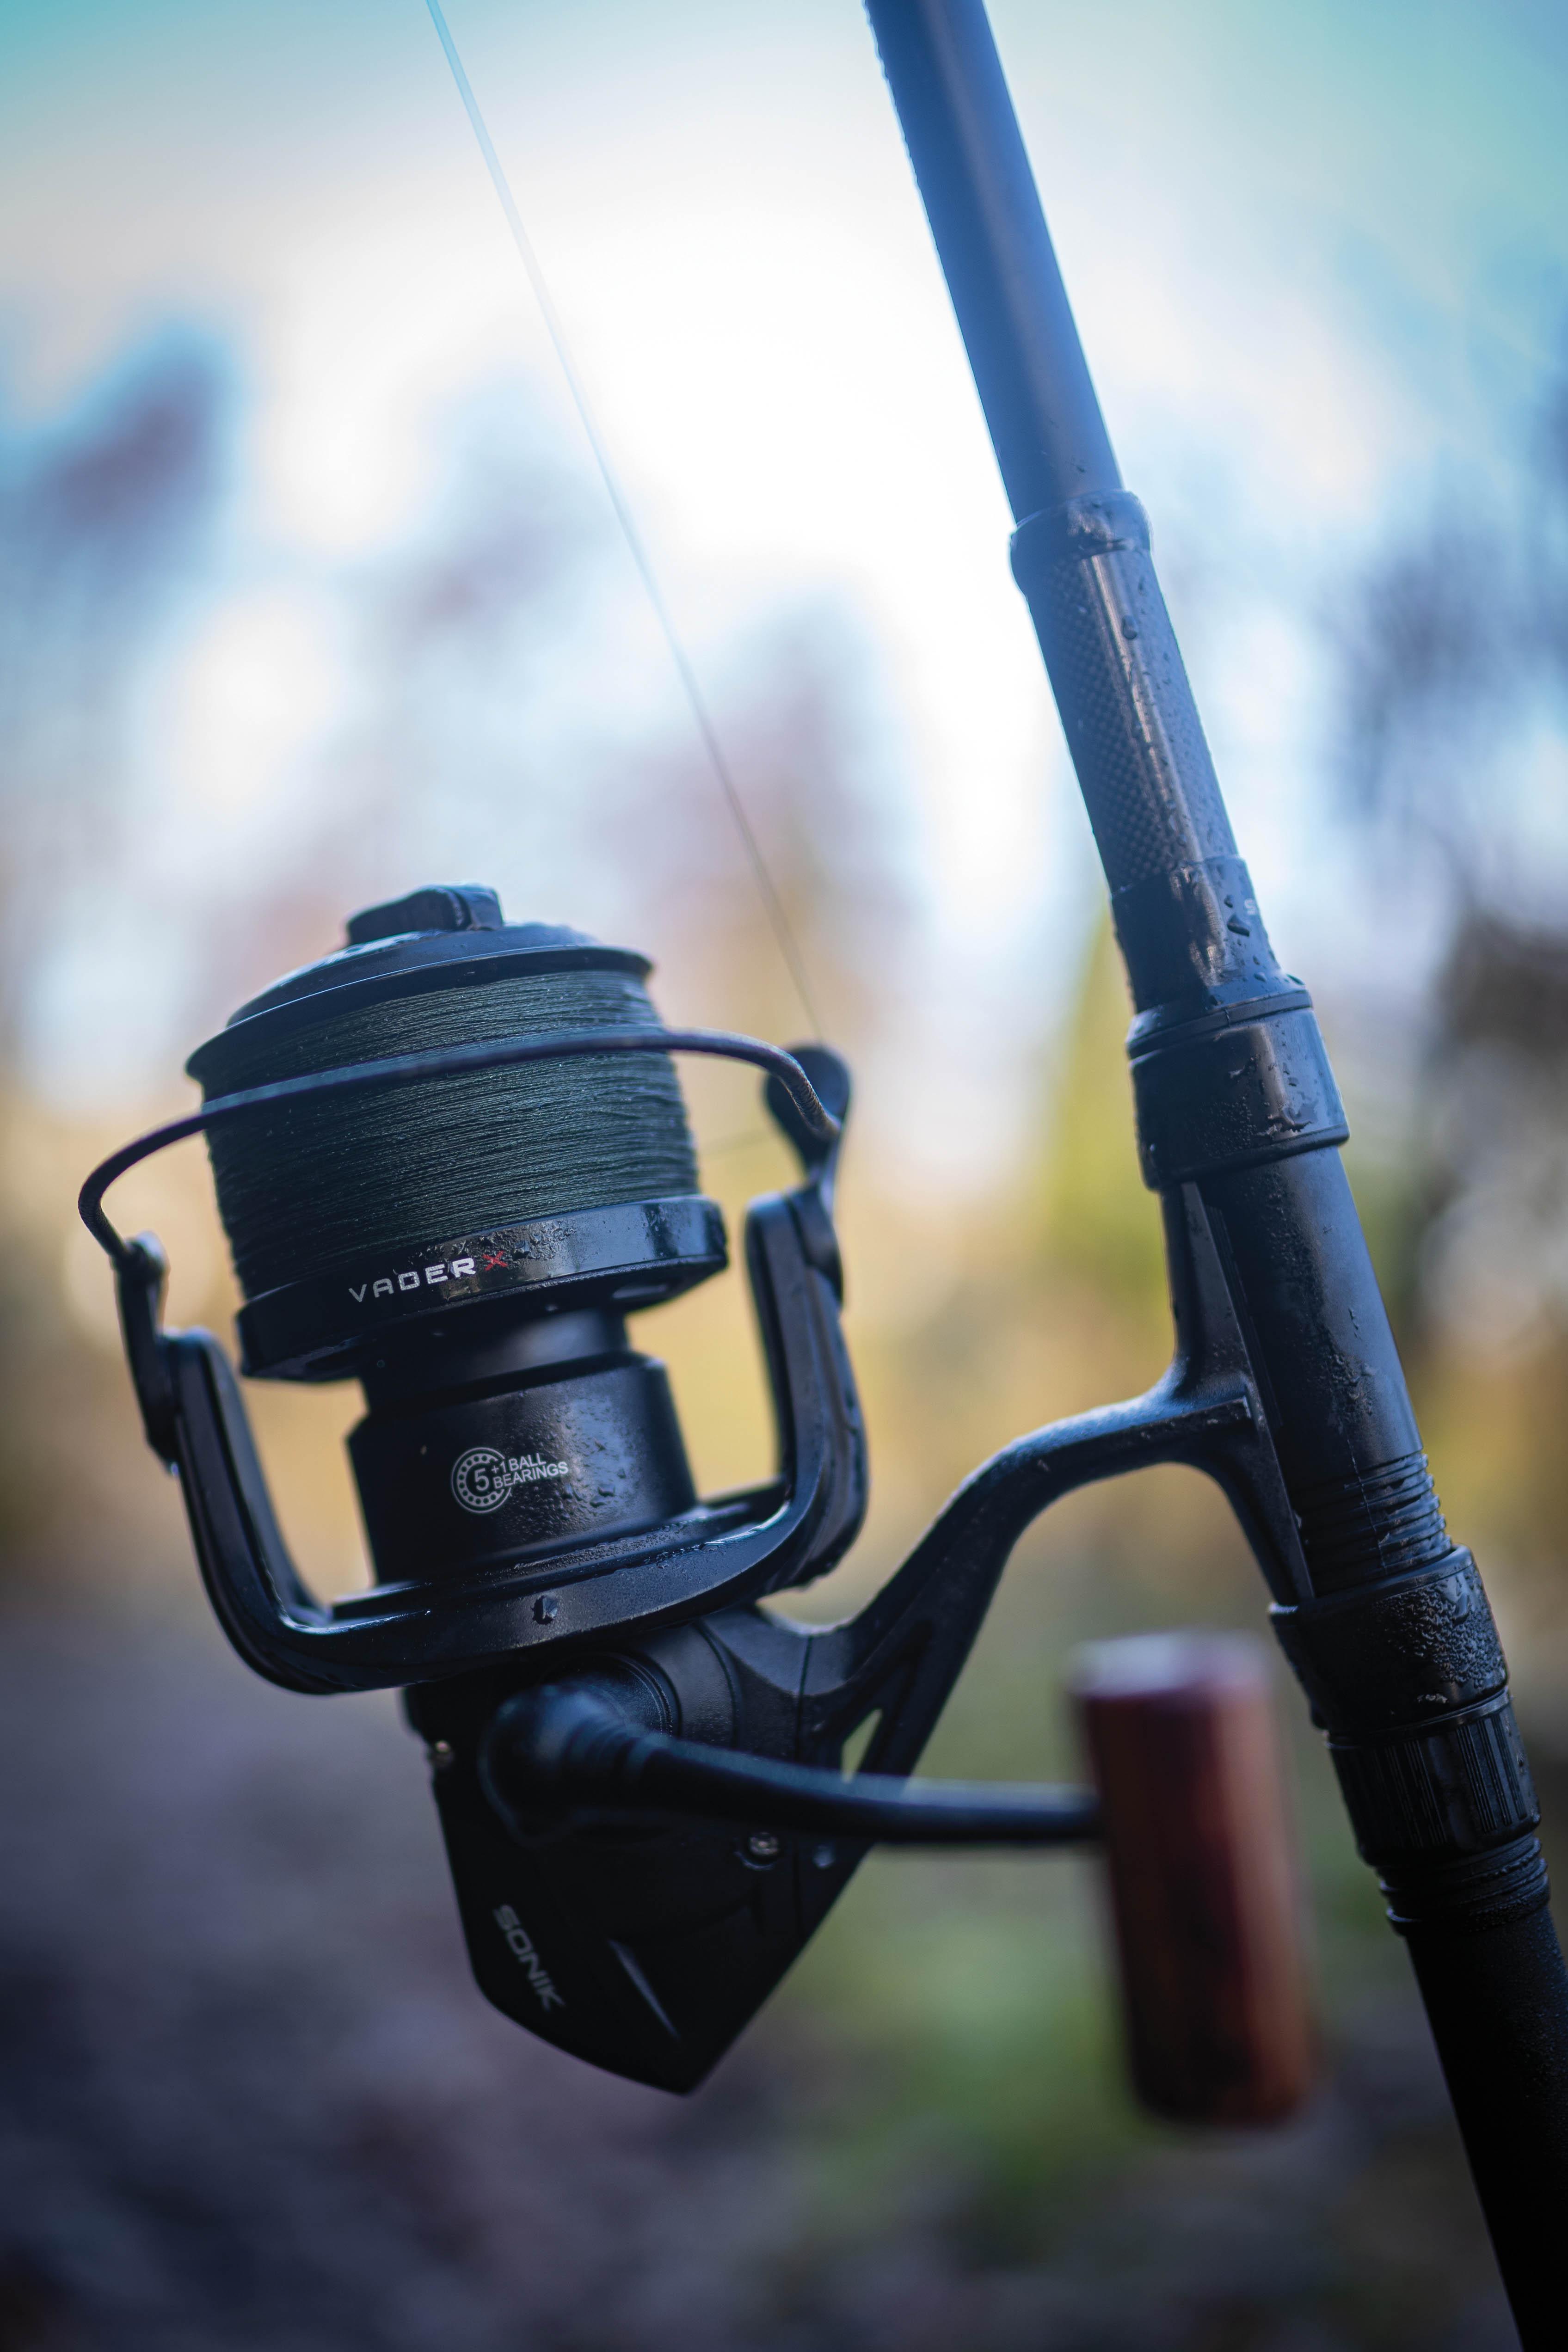 Sonik's new spod partners - the ultimate rod and reel combo